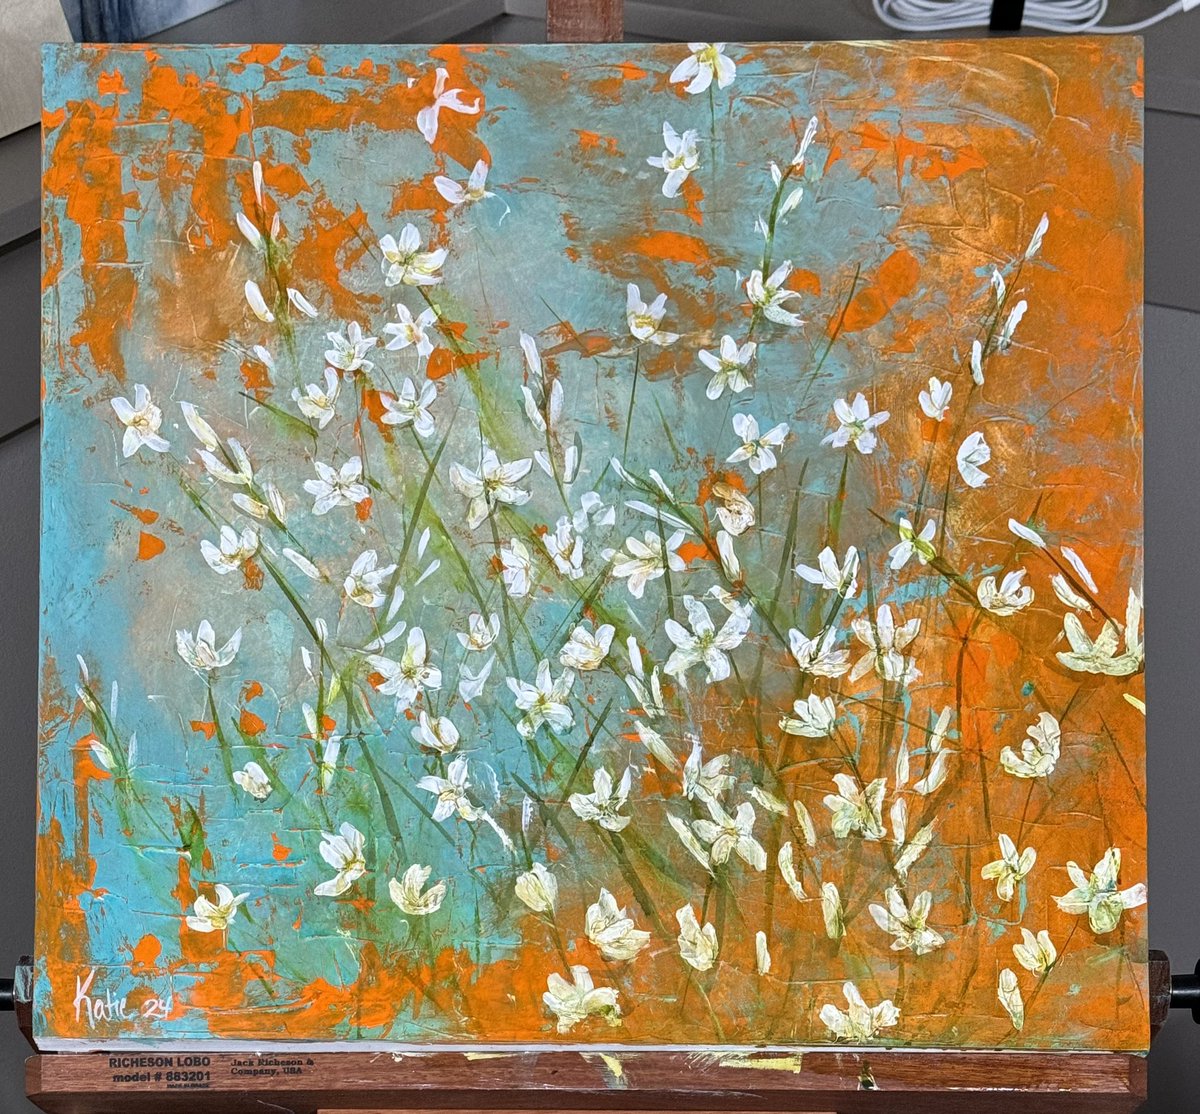 Acrylic on board. A little texture and some pretty - made up flowers. #originalart #painting #acrylicpainting #flowers